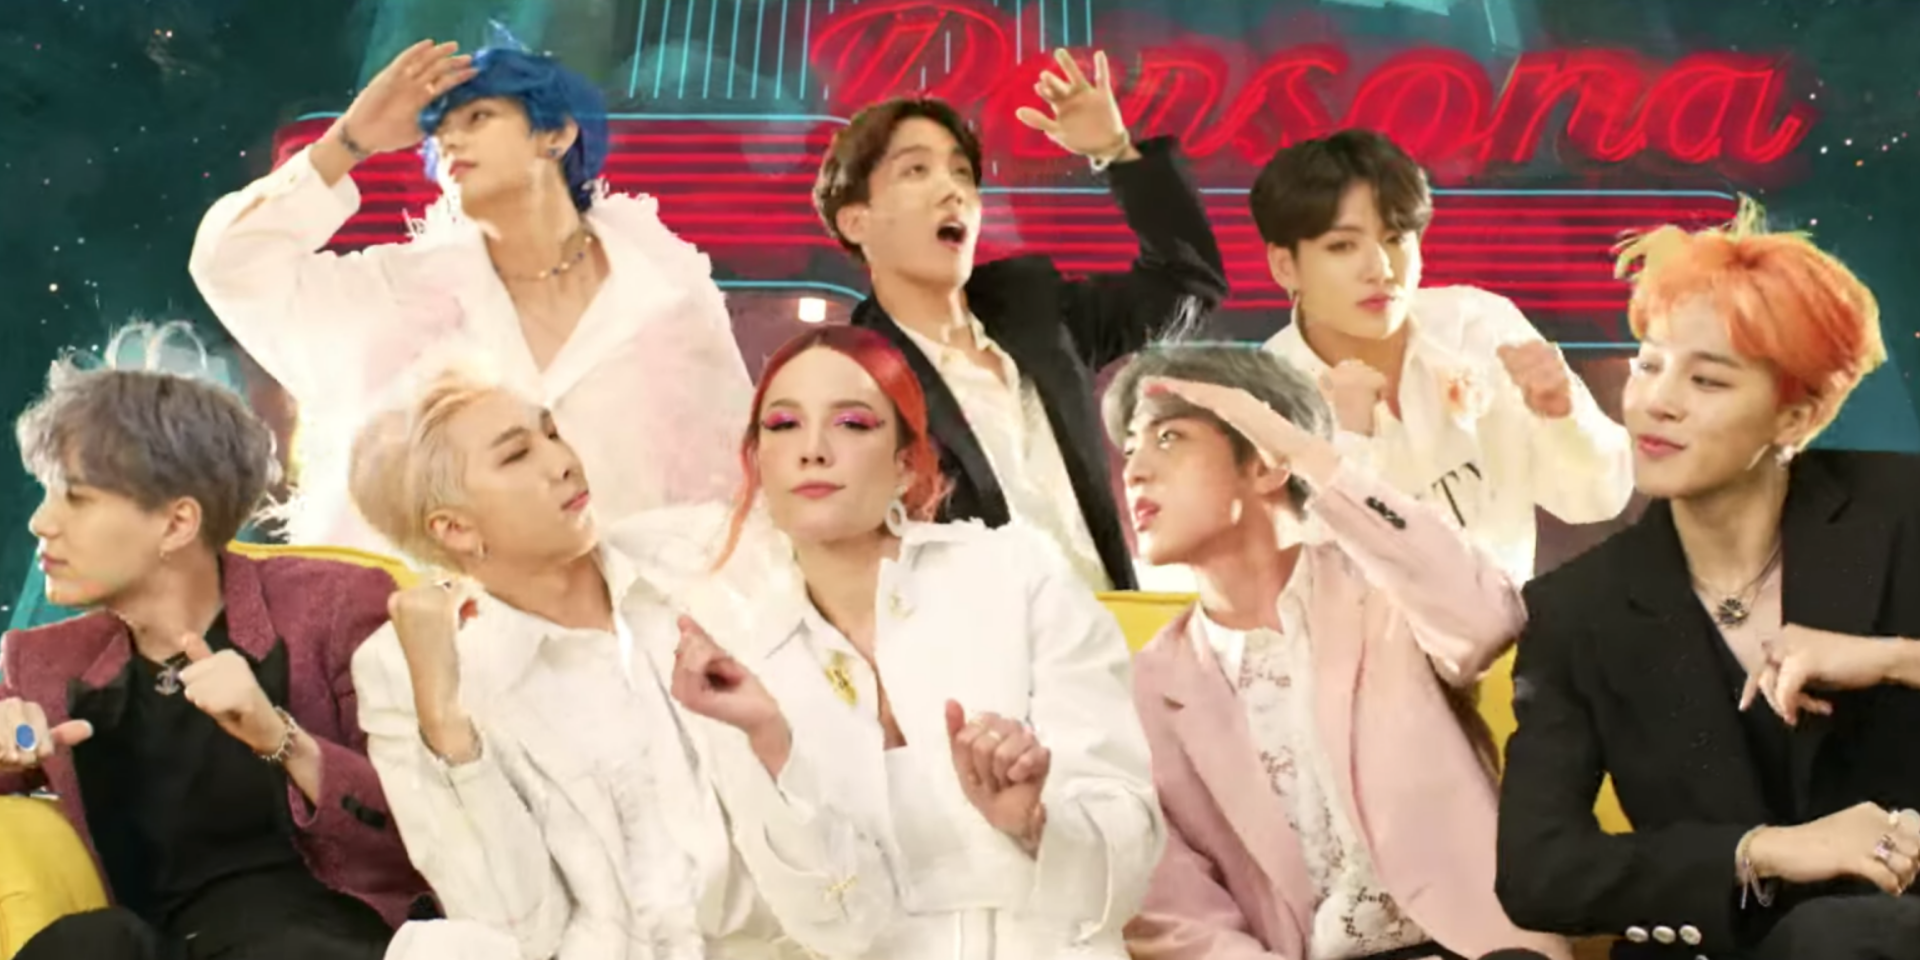 BTS' Jimin's Blue Hair in "Boy With Luv" Music Video - wide 10